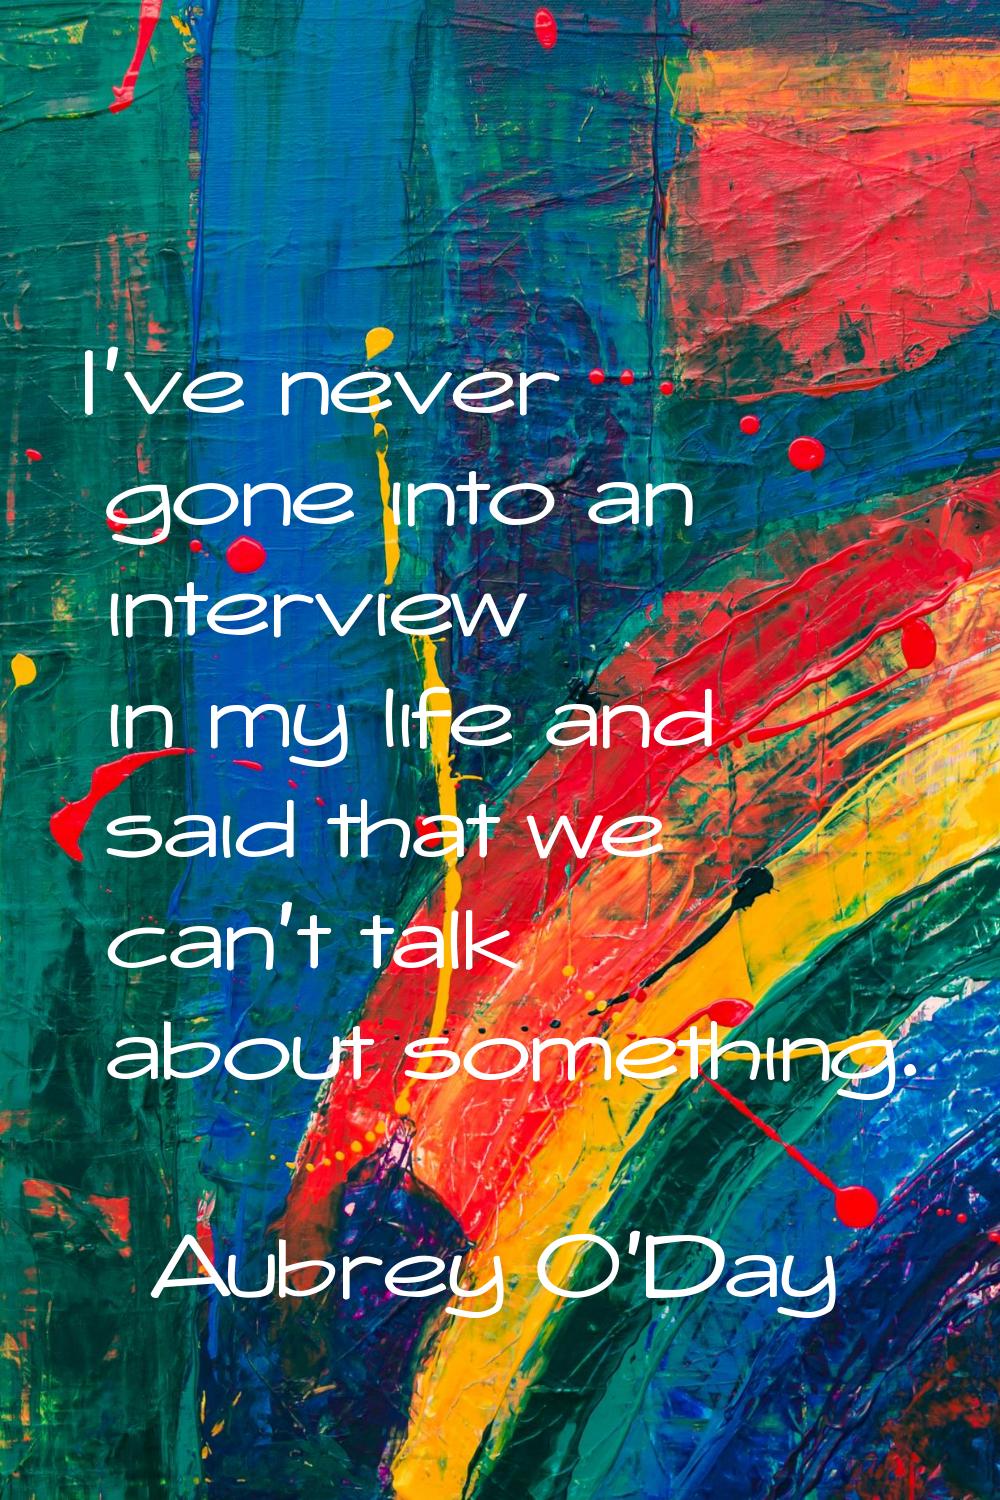 I've never gone into an interview in my life and said that we can't talk about something.